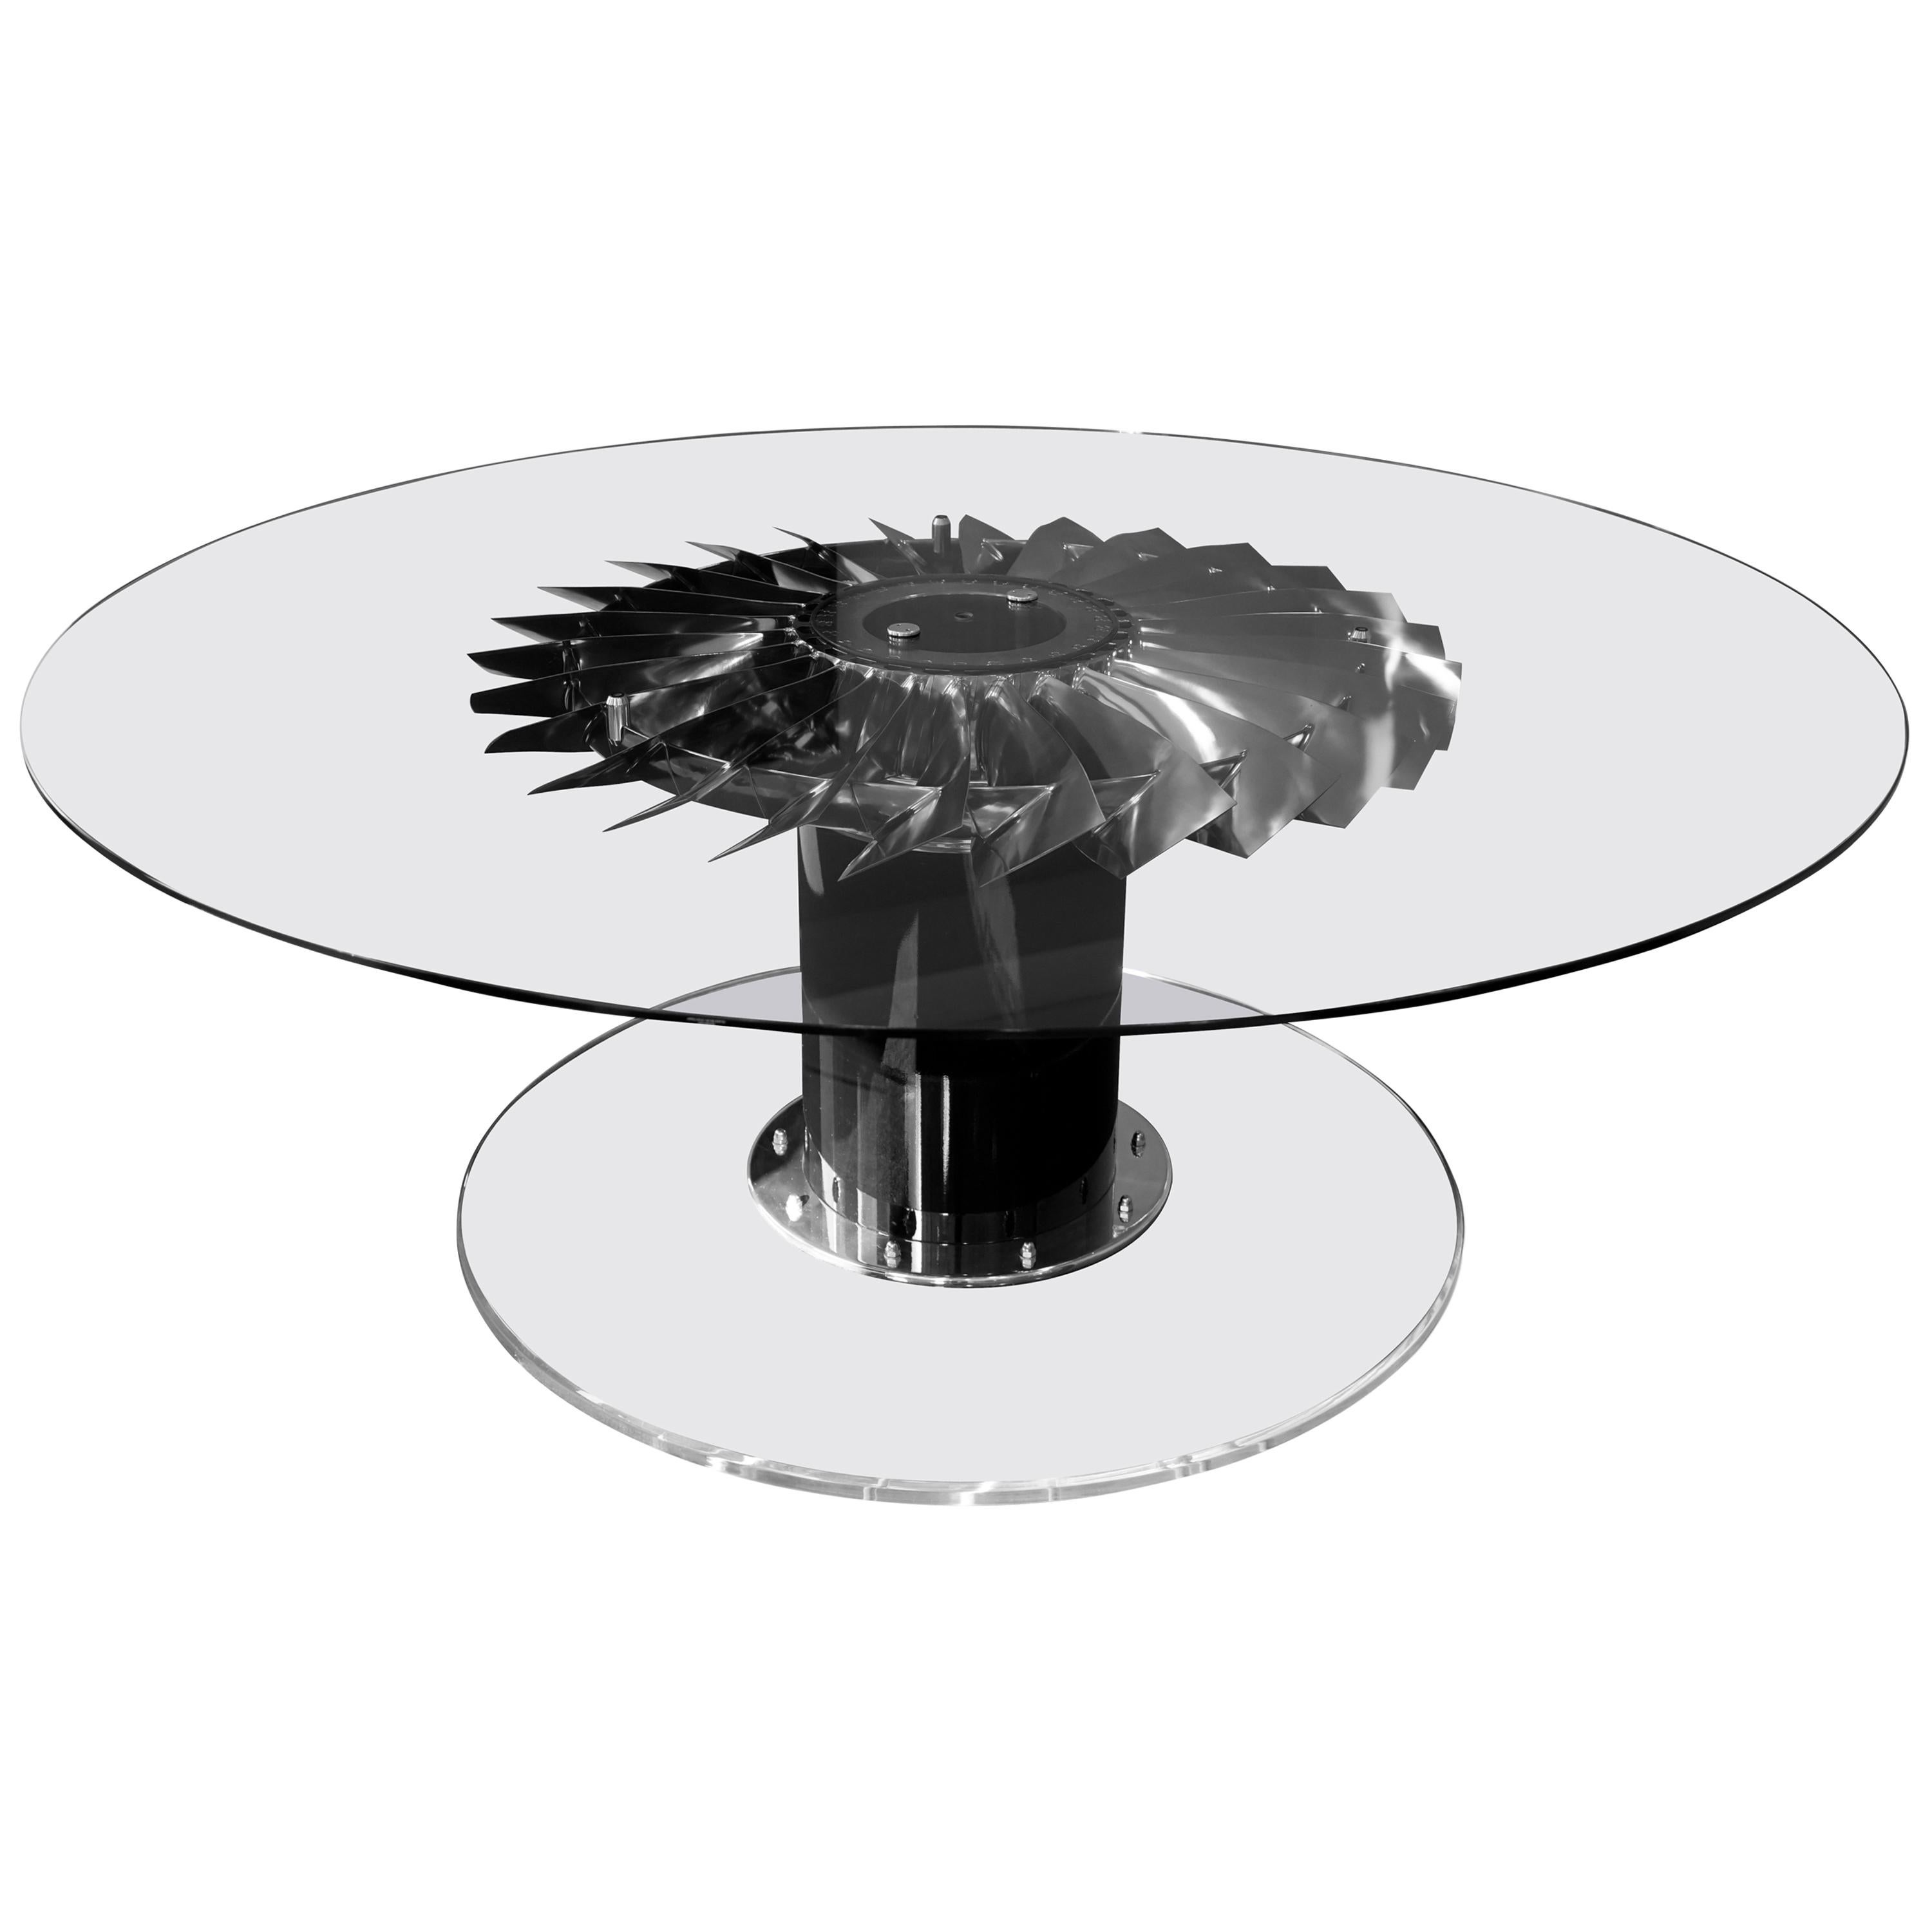 RAF Harrier Jet Aircraft Boardroom or Dining Table For Sale